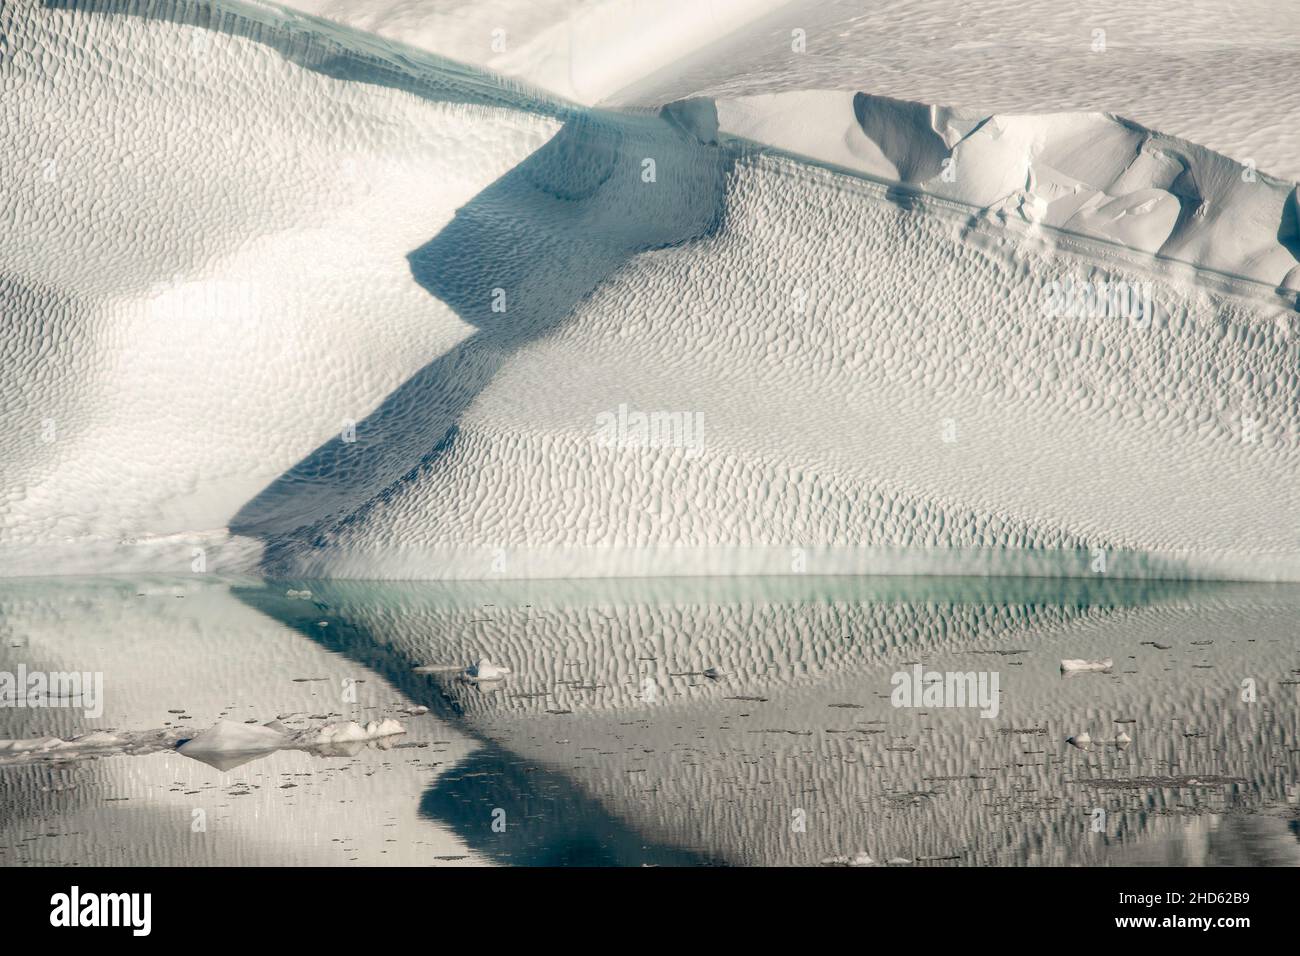 Iceberg textures and reflections, Rodefjord, Scoresby Sund, East Greenland Stock Photo